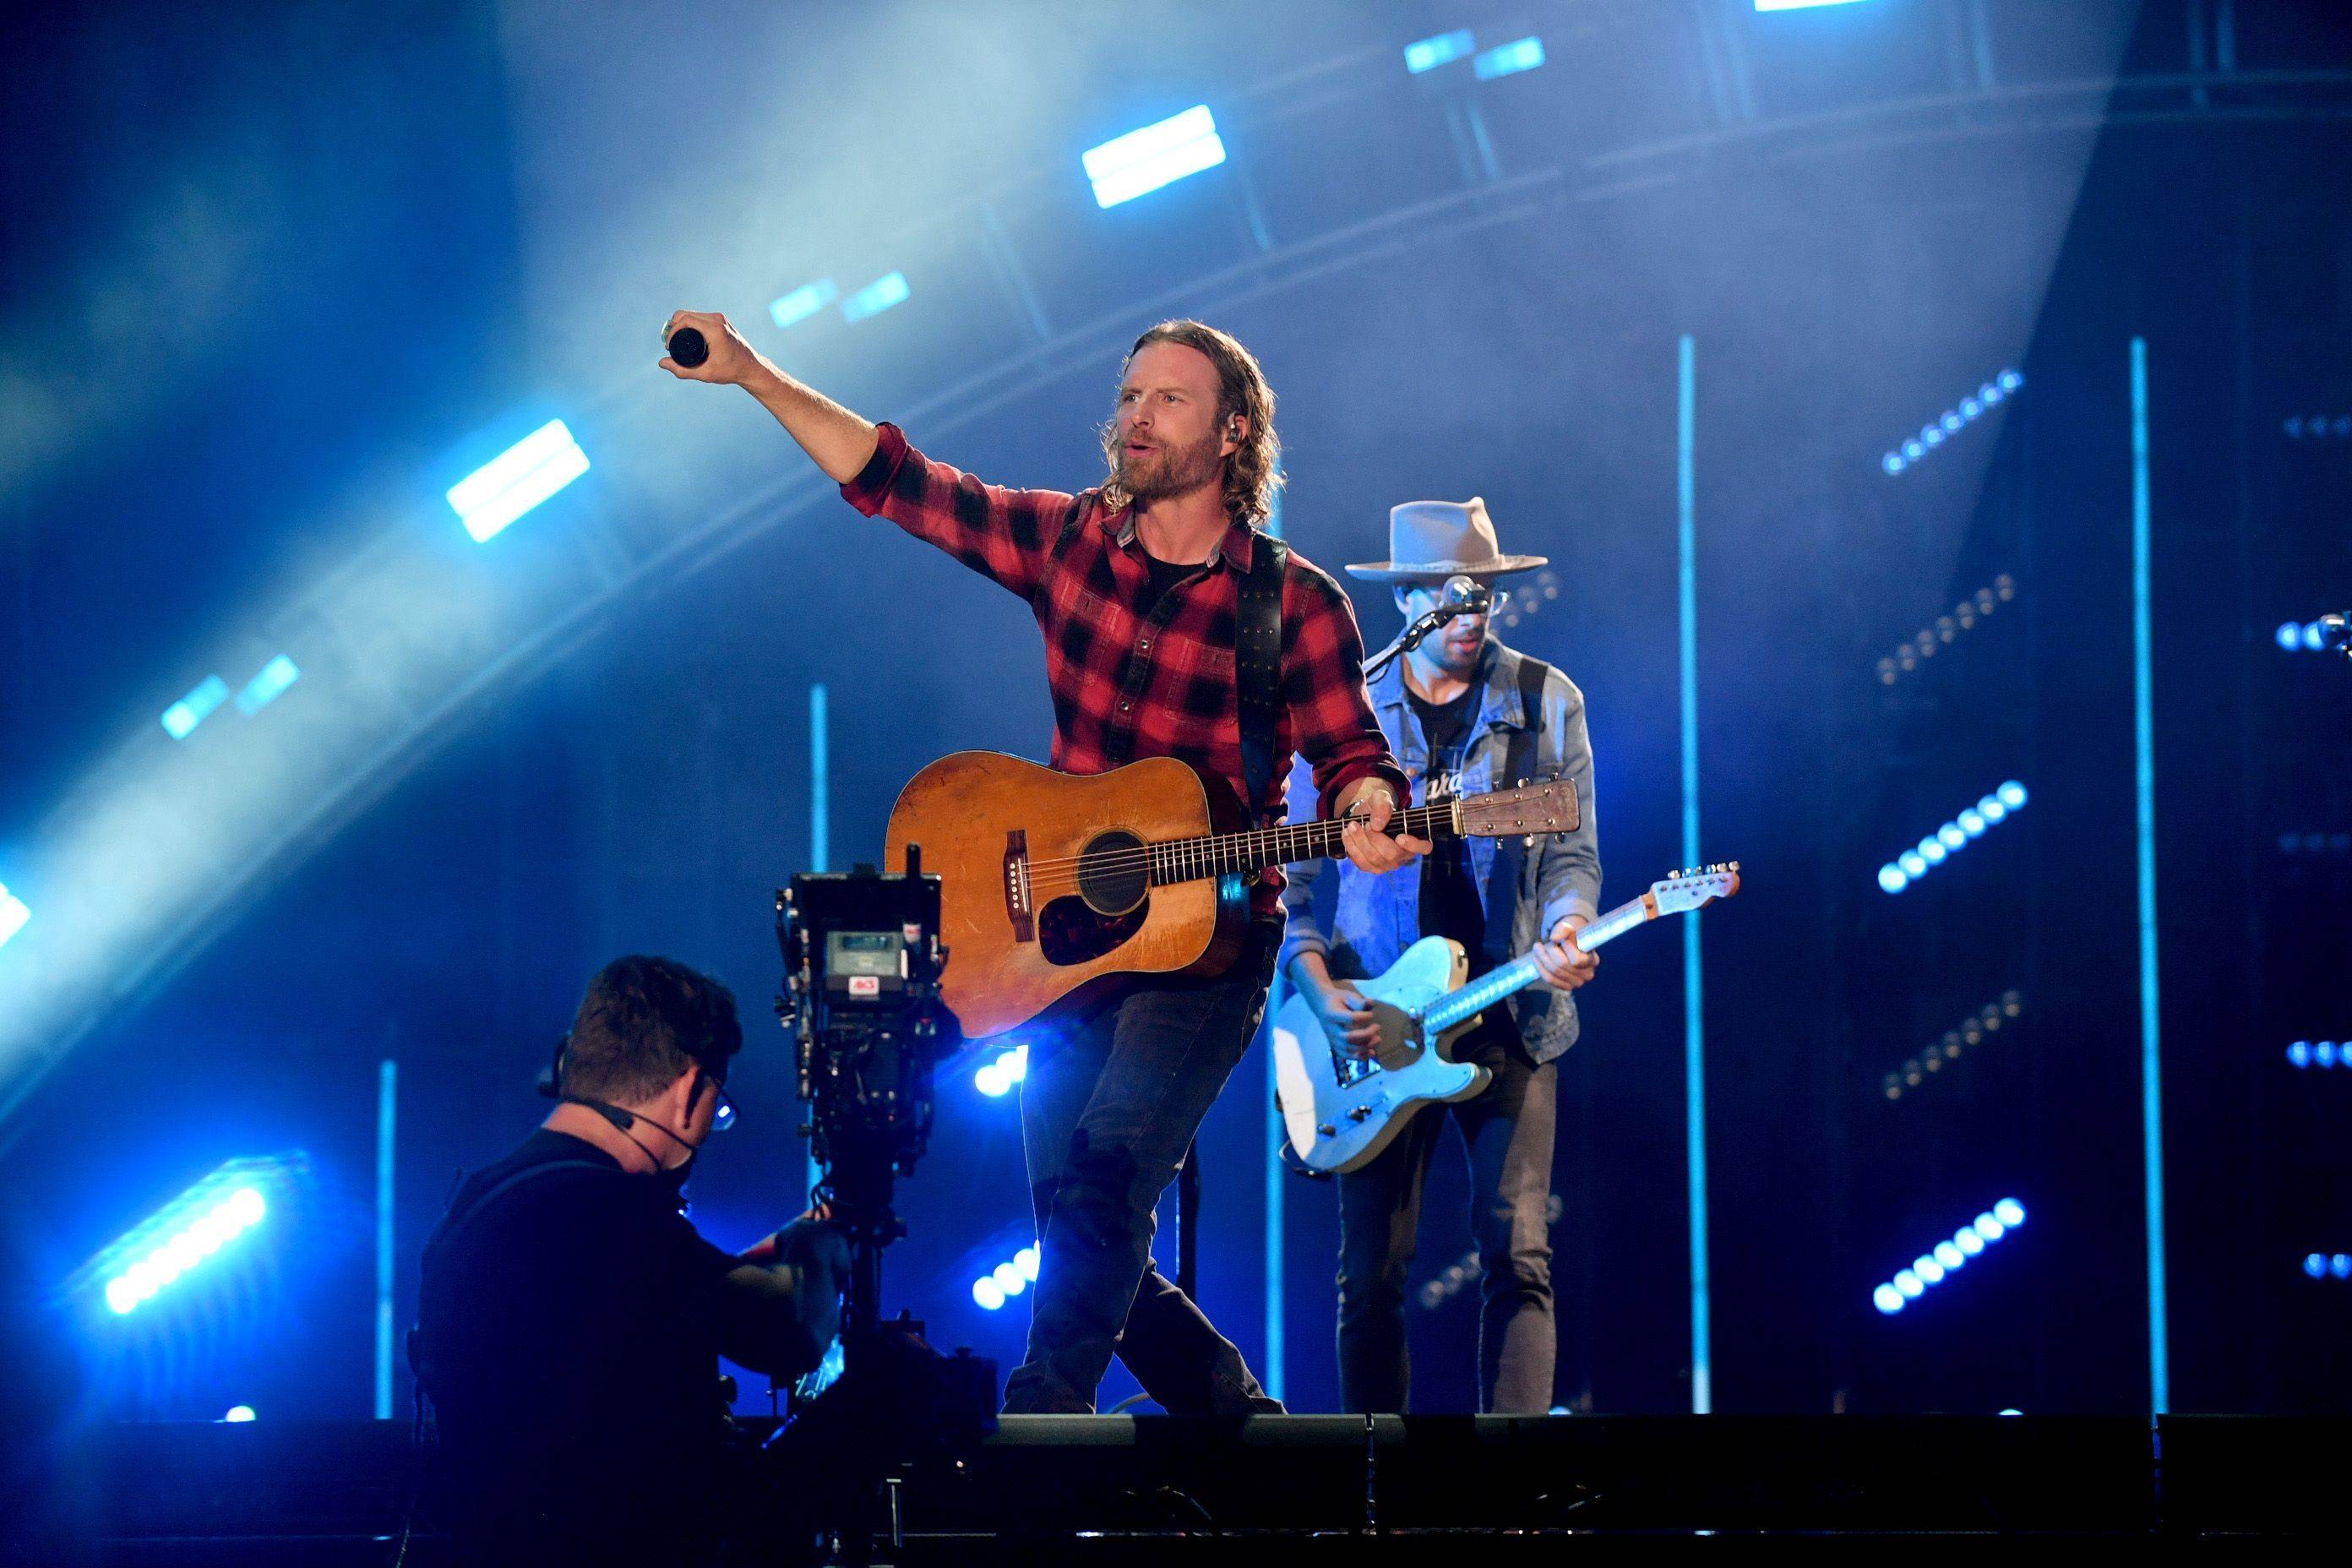 WATCH Dierks Bentley Shares Stage With Daughter Evie To Perform Pink’s